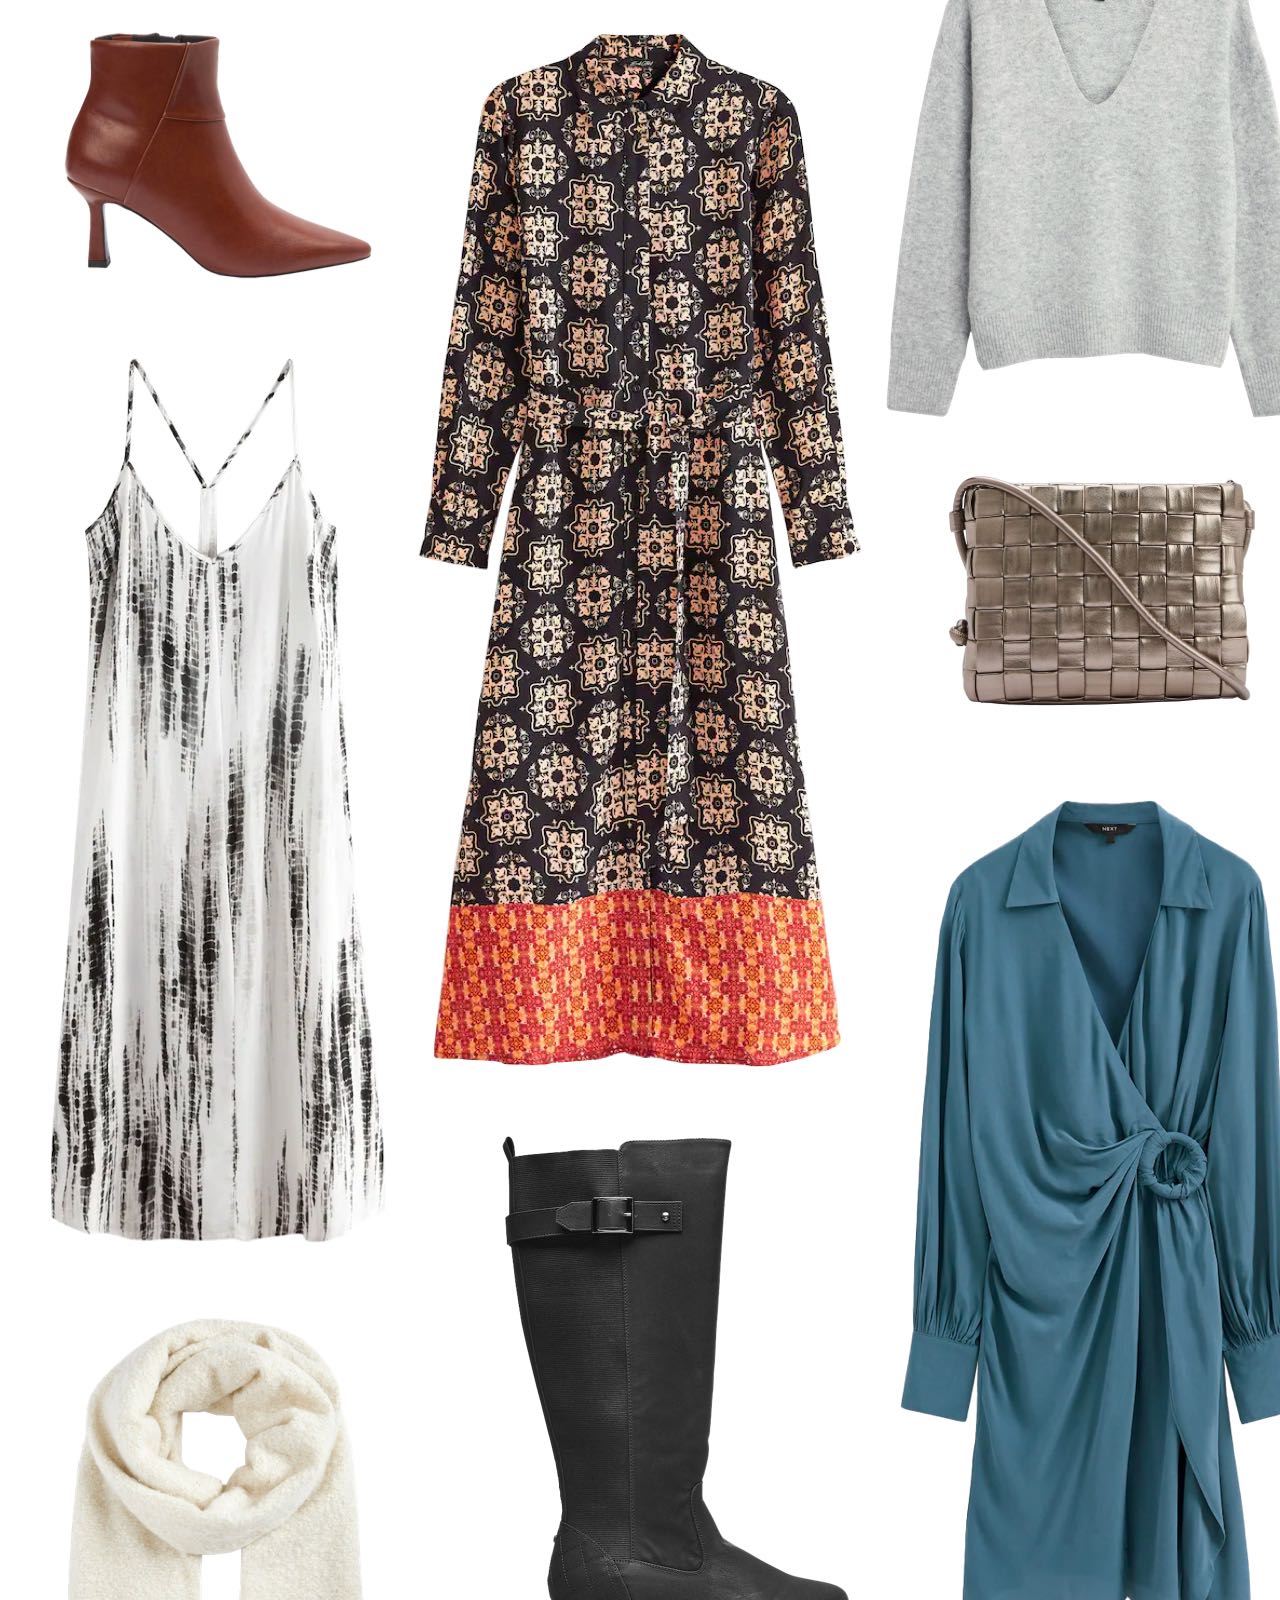 12 Ways to Wear Your Dresses With Tights and Boots